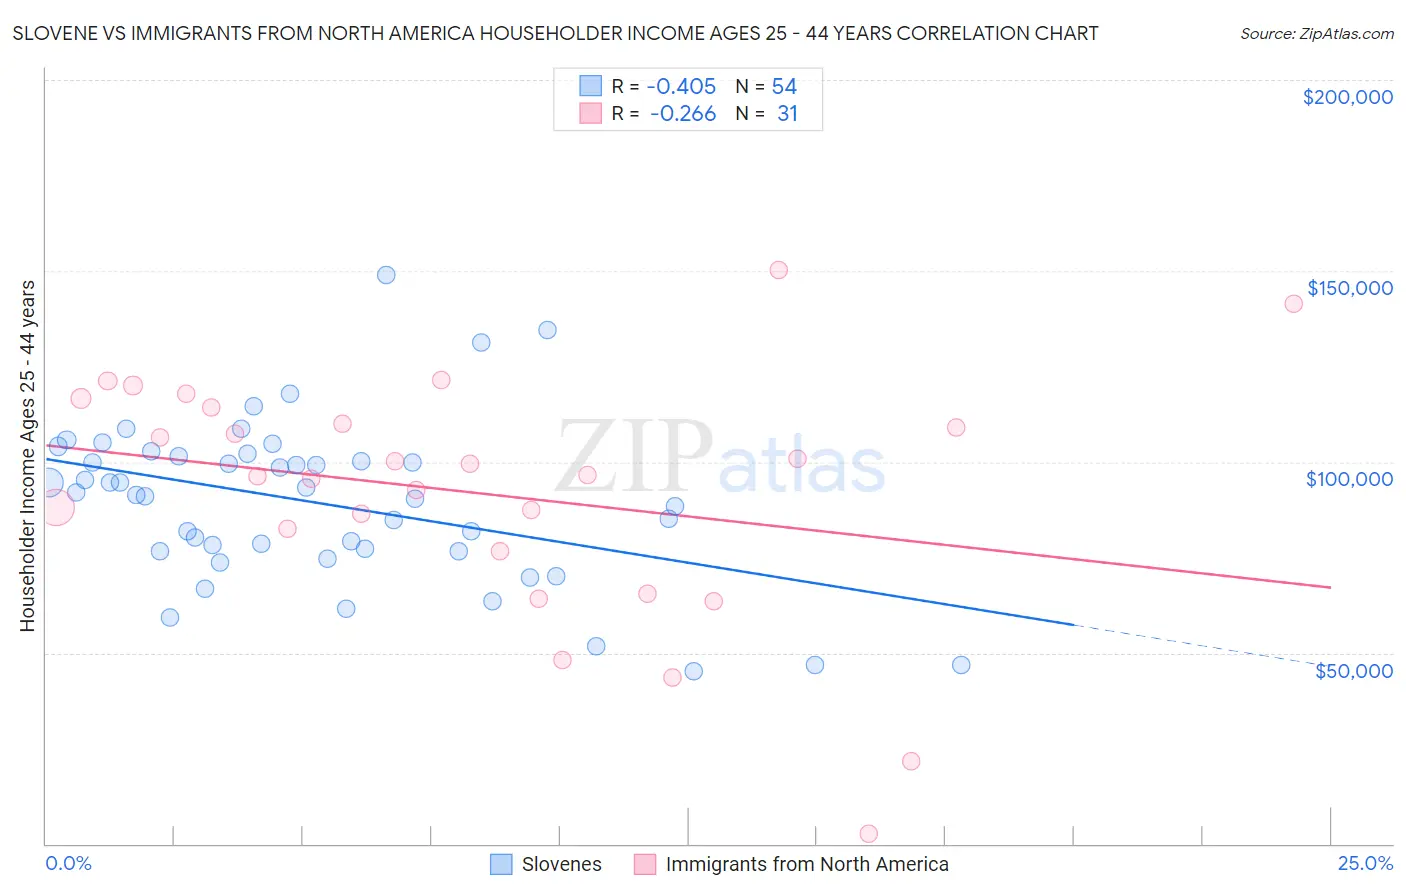 Slovene vs Immigrants from North America Householder Income Ages 25 - 44 years